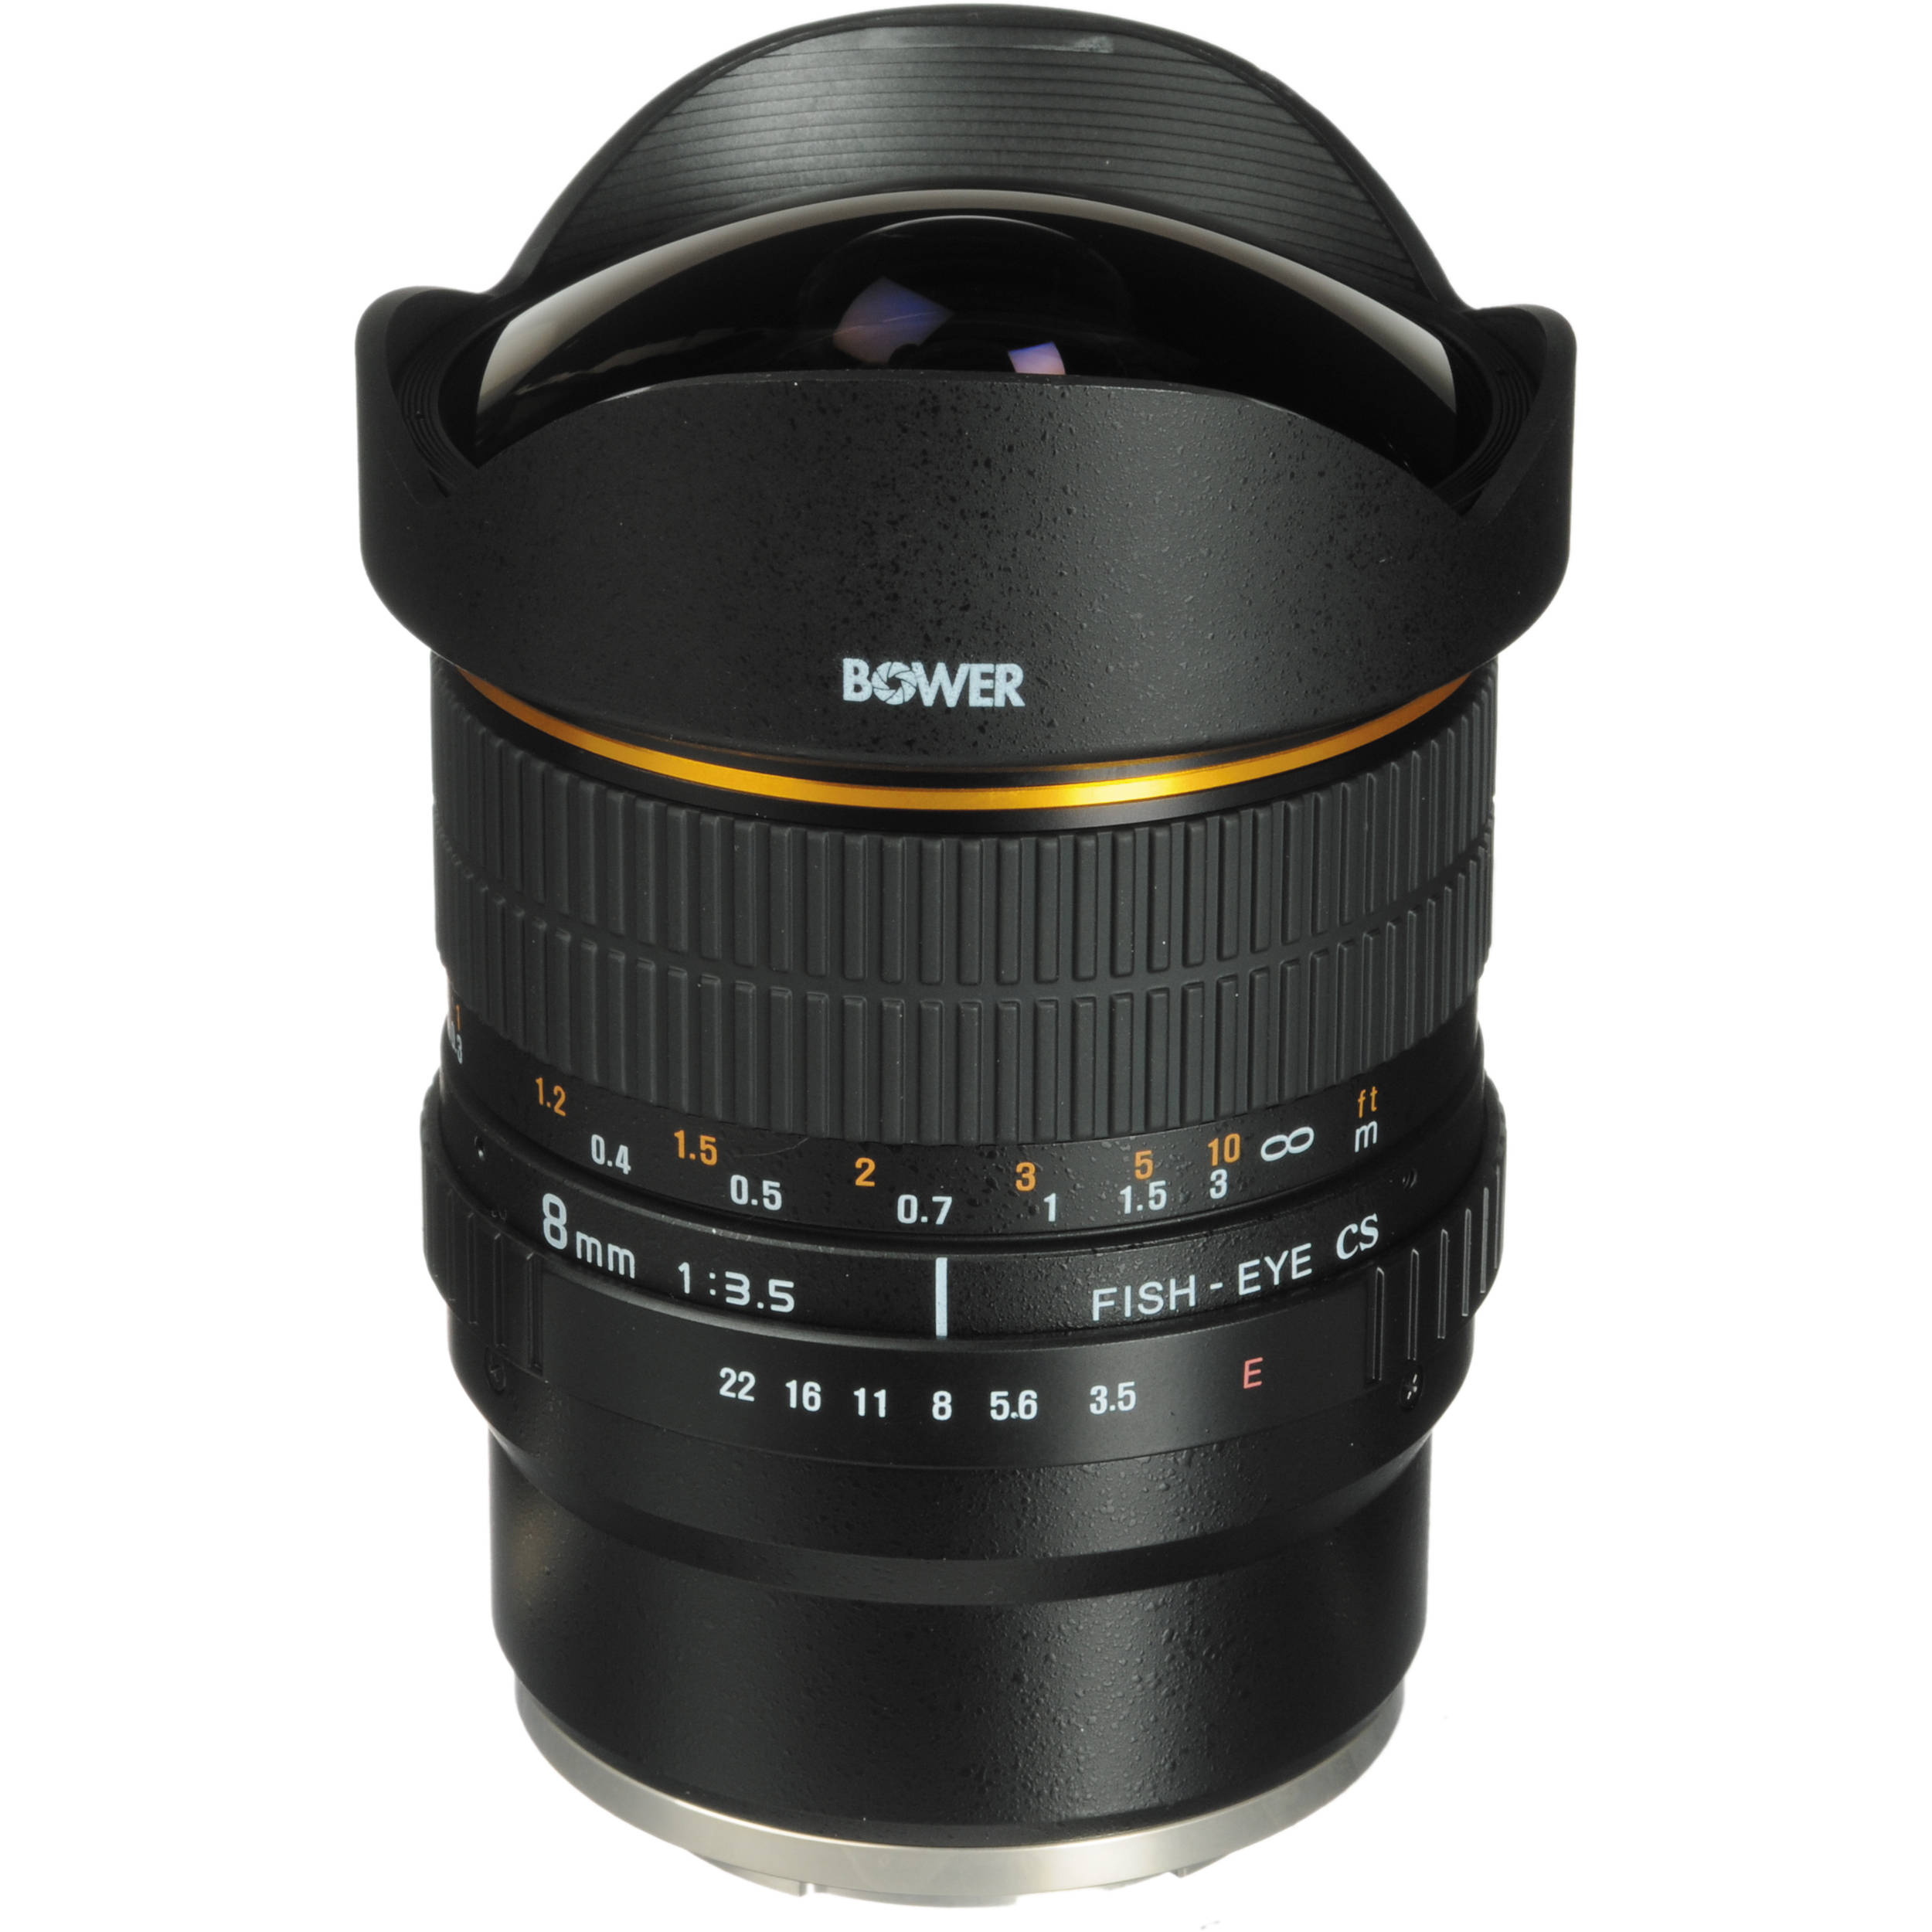 Bower 8mm f/3.5 Super Wide Angle Fisheye Lens for Sony